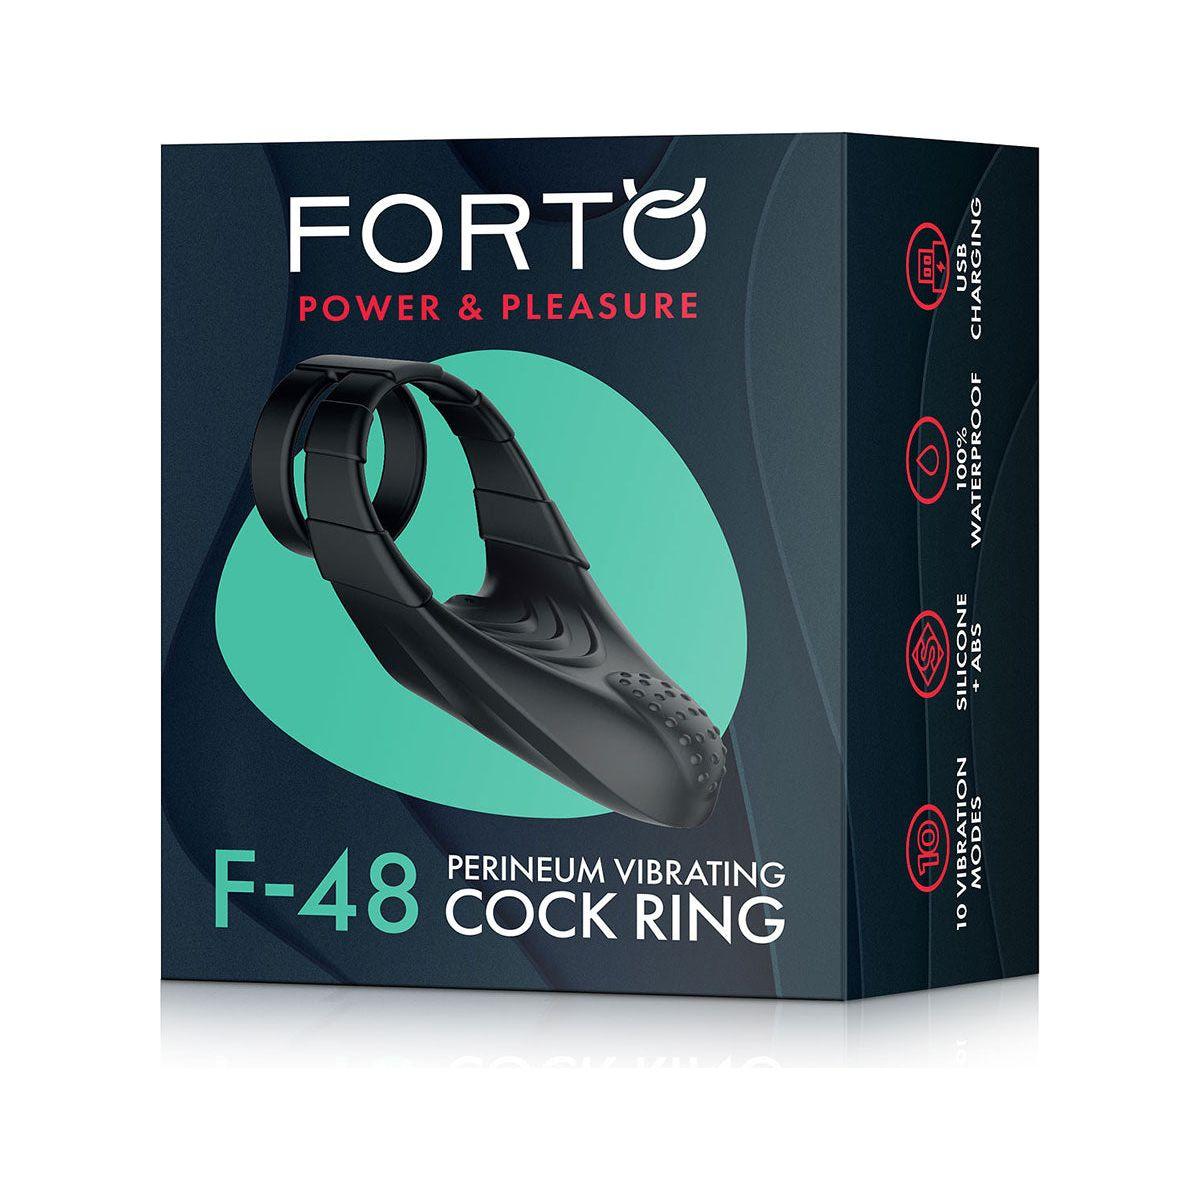 FORTO F-48 Vibrating Perineum Double C-Ring - Black - shop enby